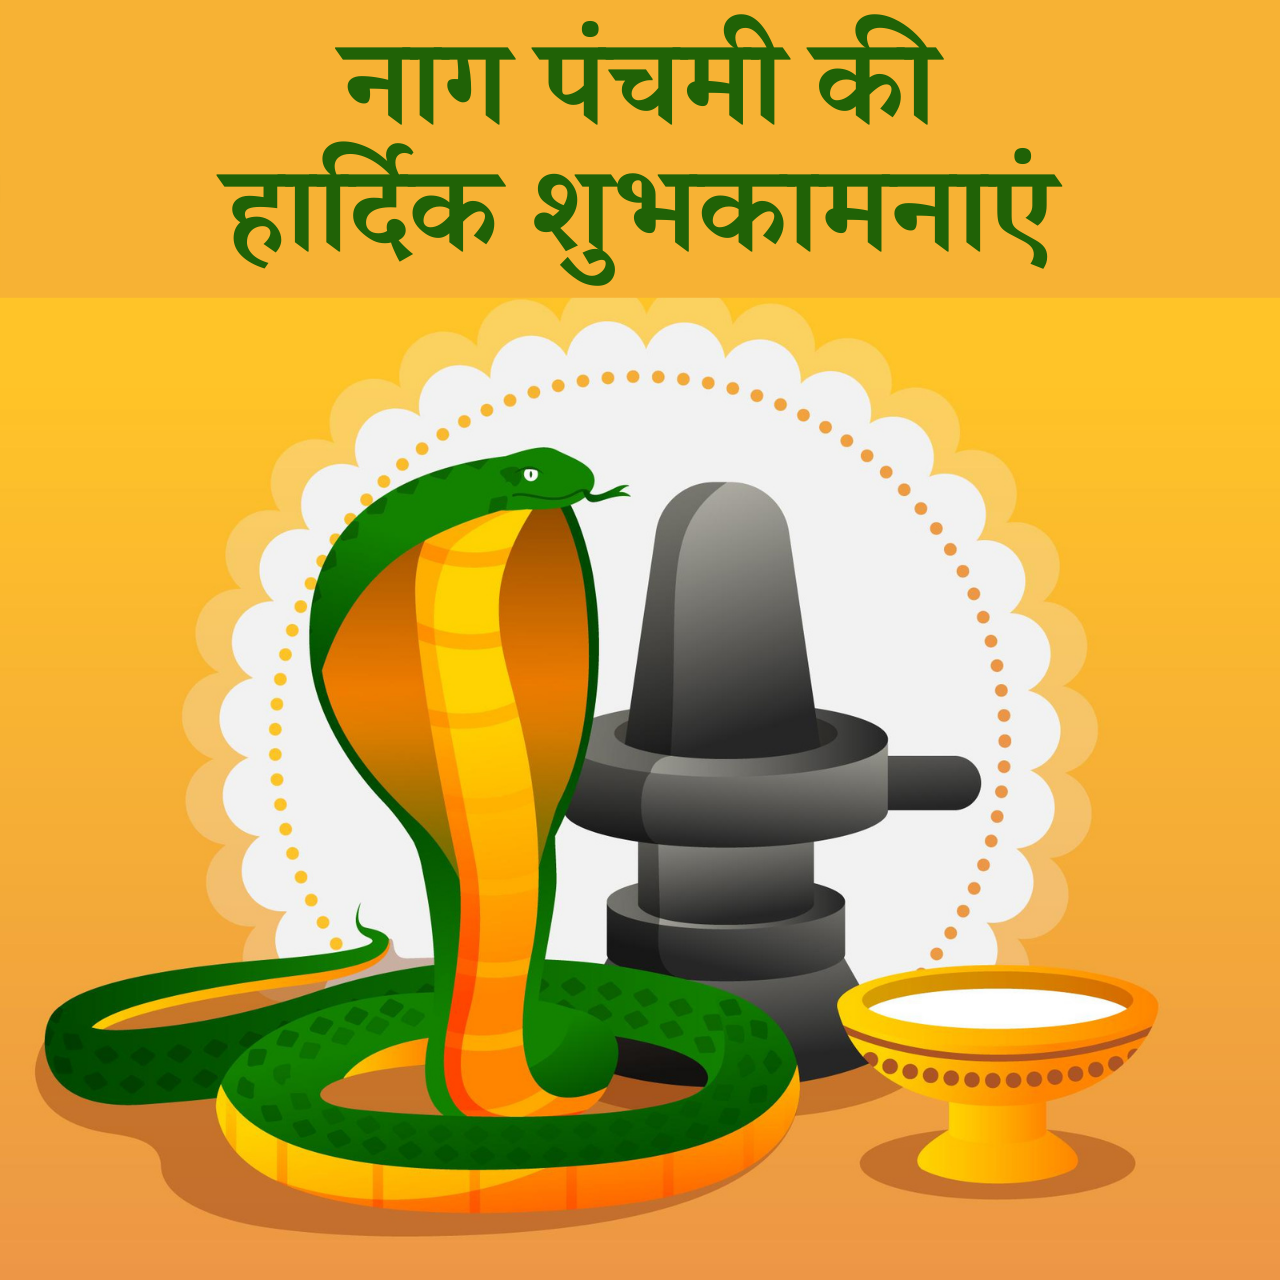 Nag Panchami 2021 Hindi Wishes and HD Images: Wallpaper, Stickers, Status, Messages, Quotes, Poster, and Greetings